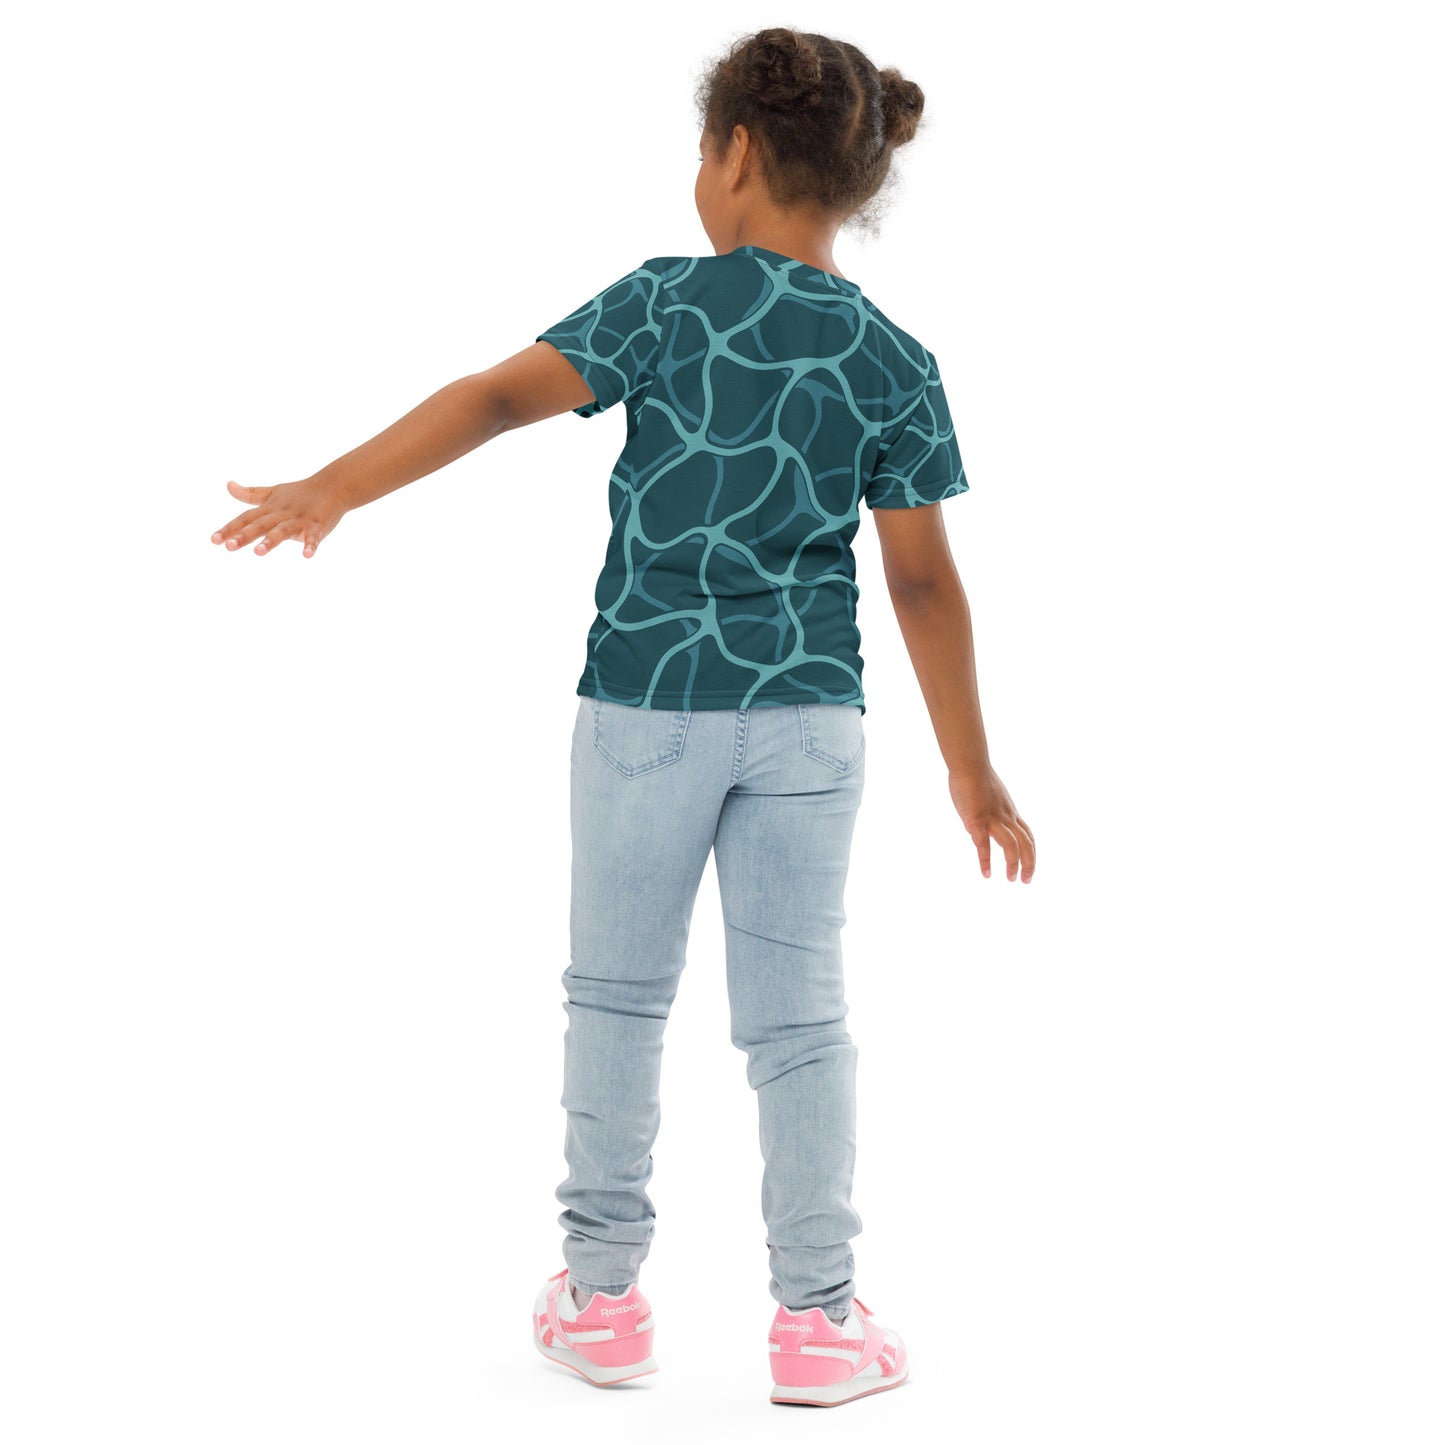 Kid with a apple blue sea green T-shirt with a water pattern